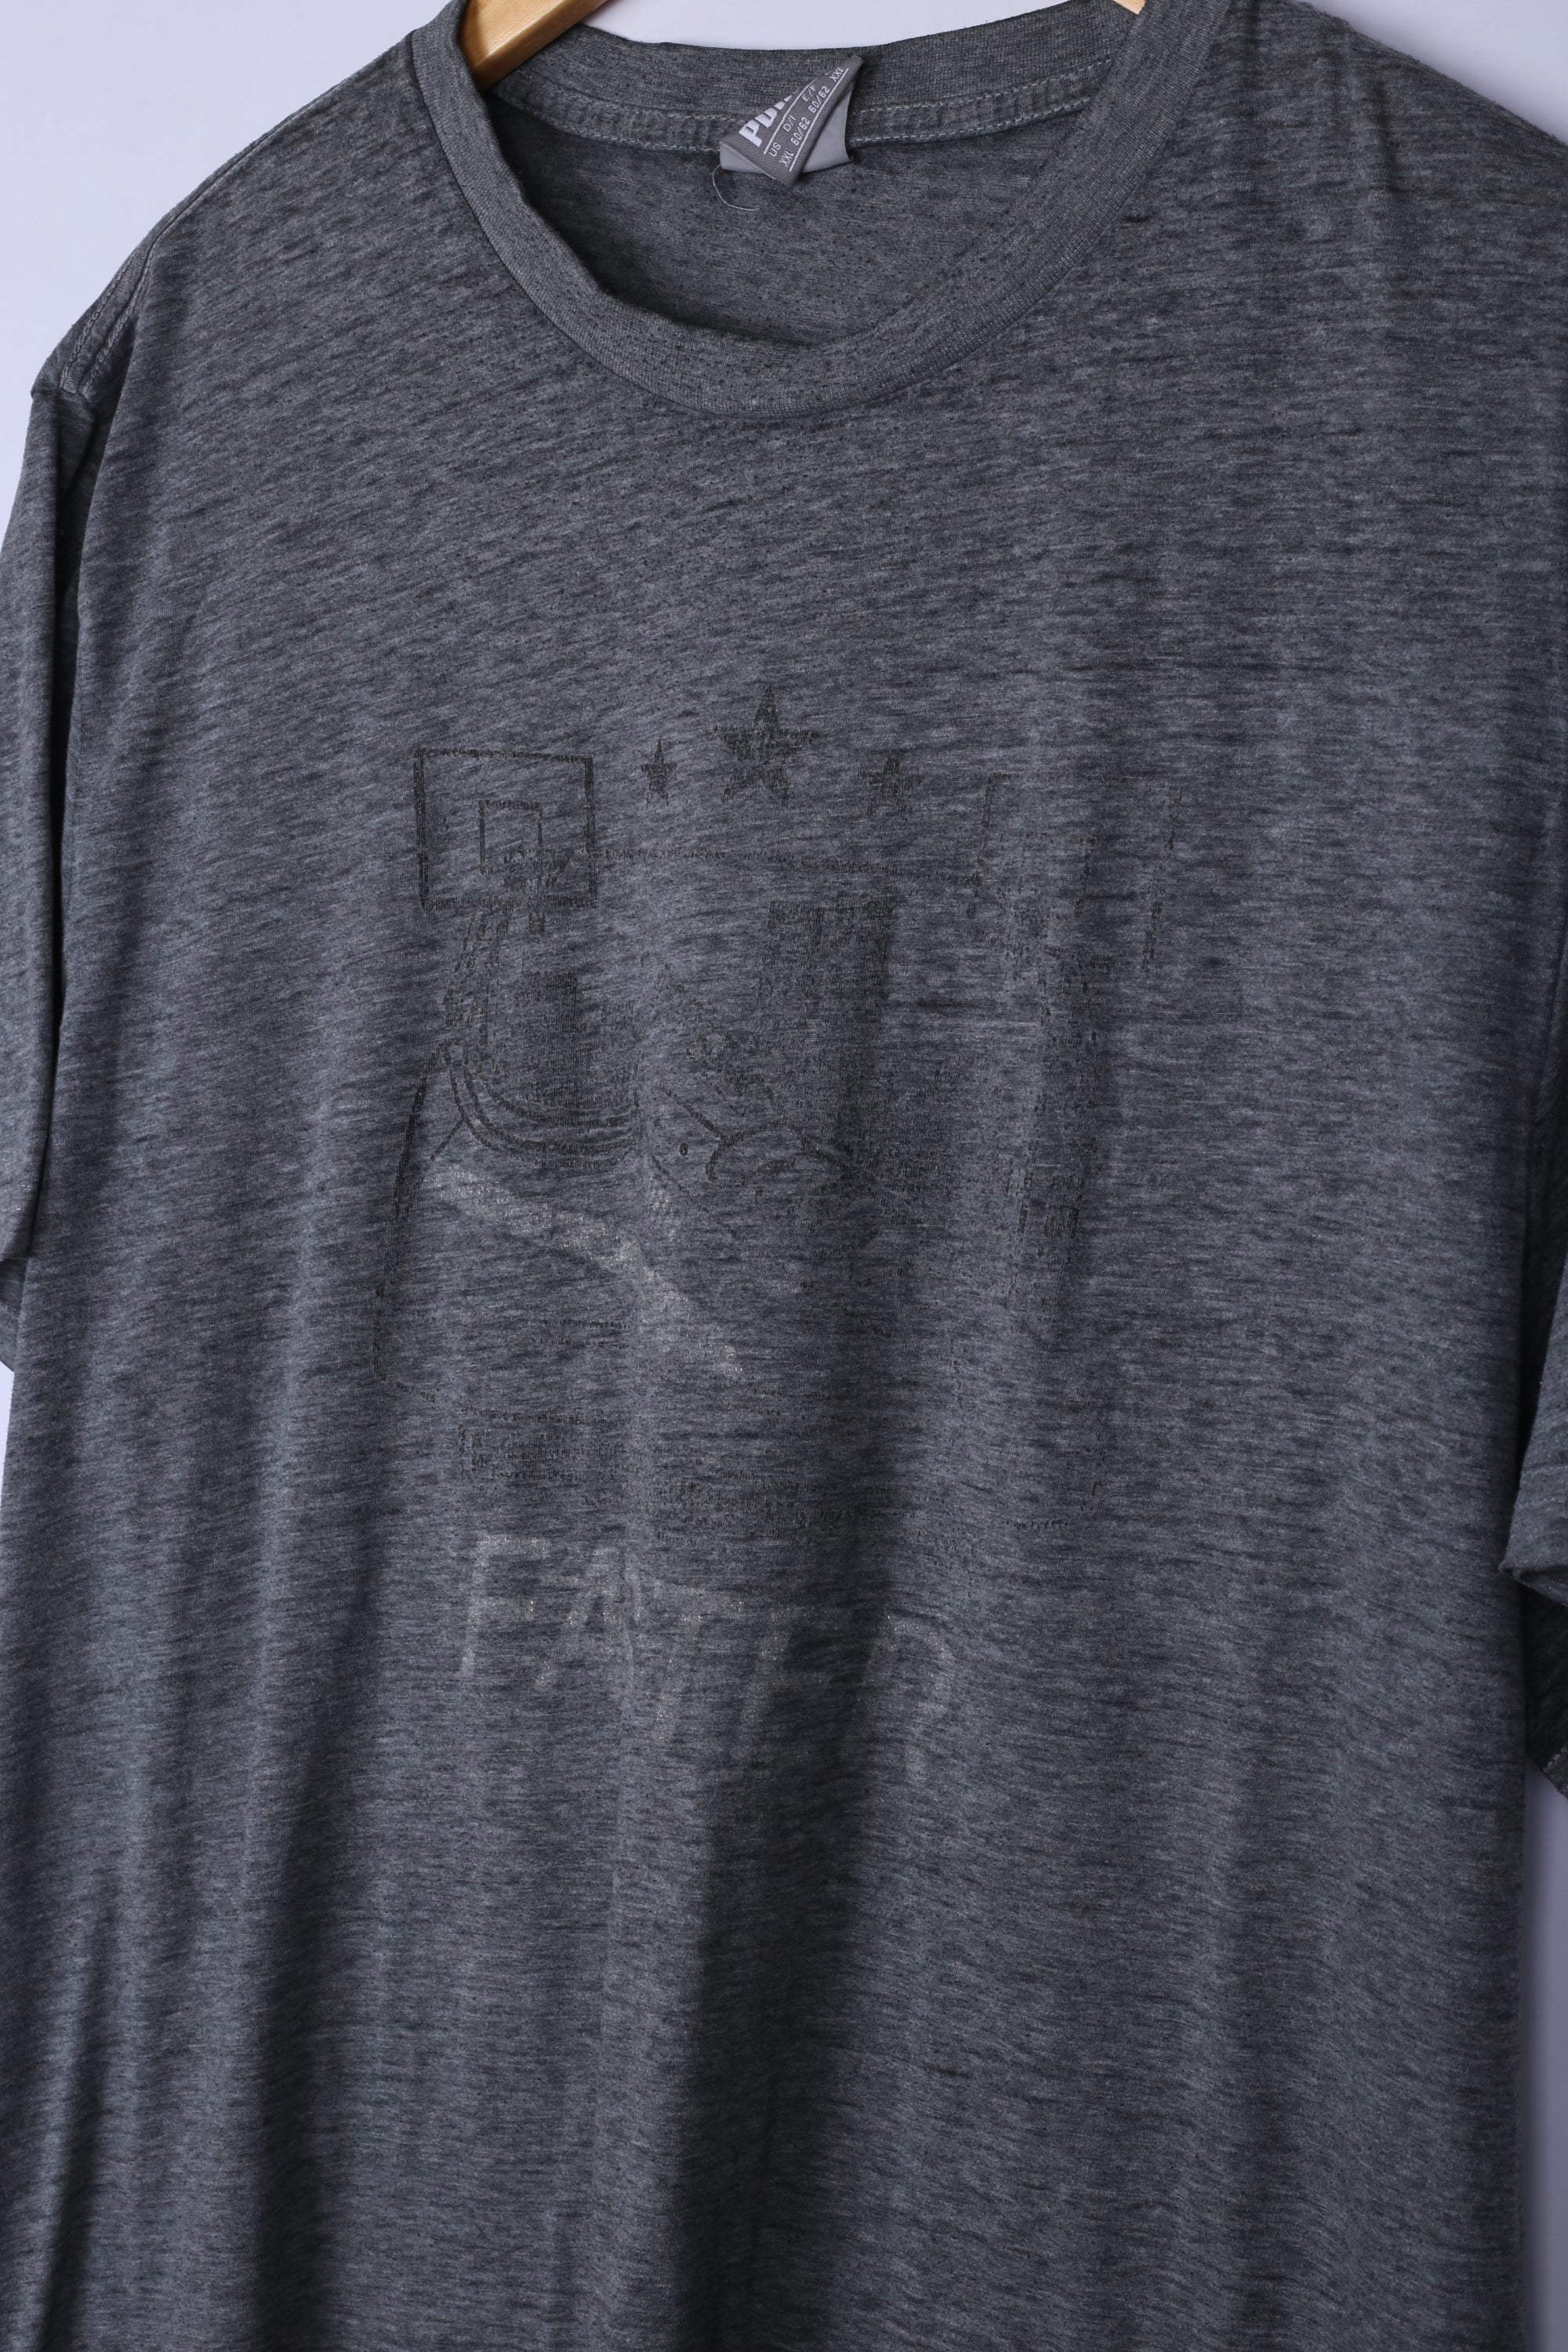 Vintage Faster Graphic Tee Grey